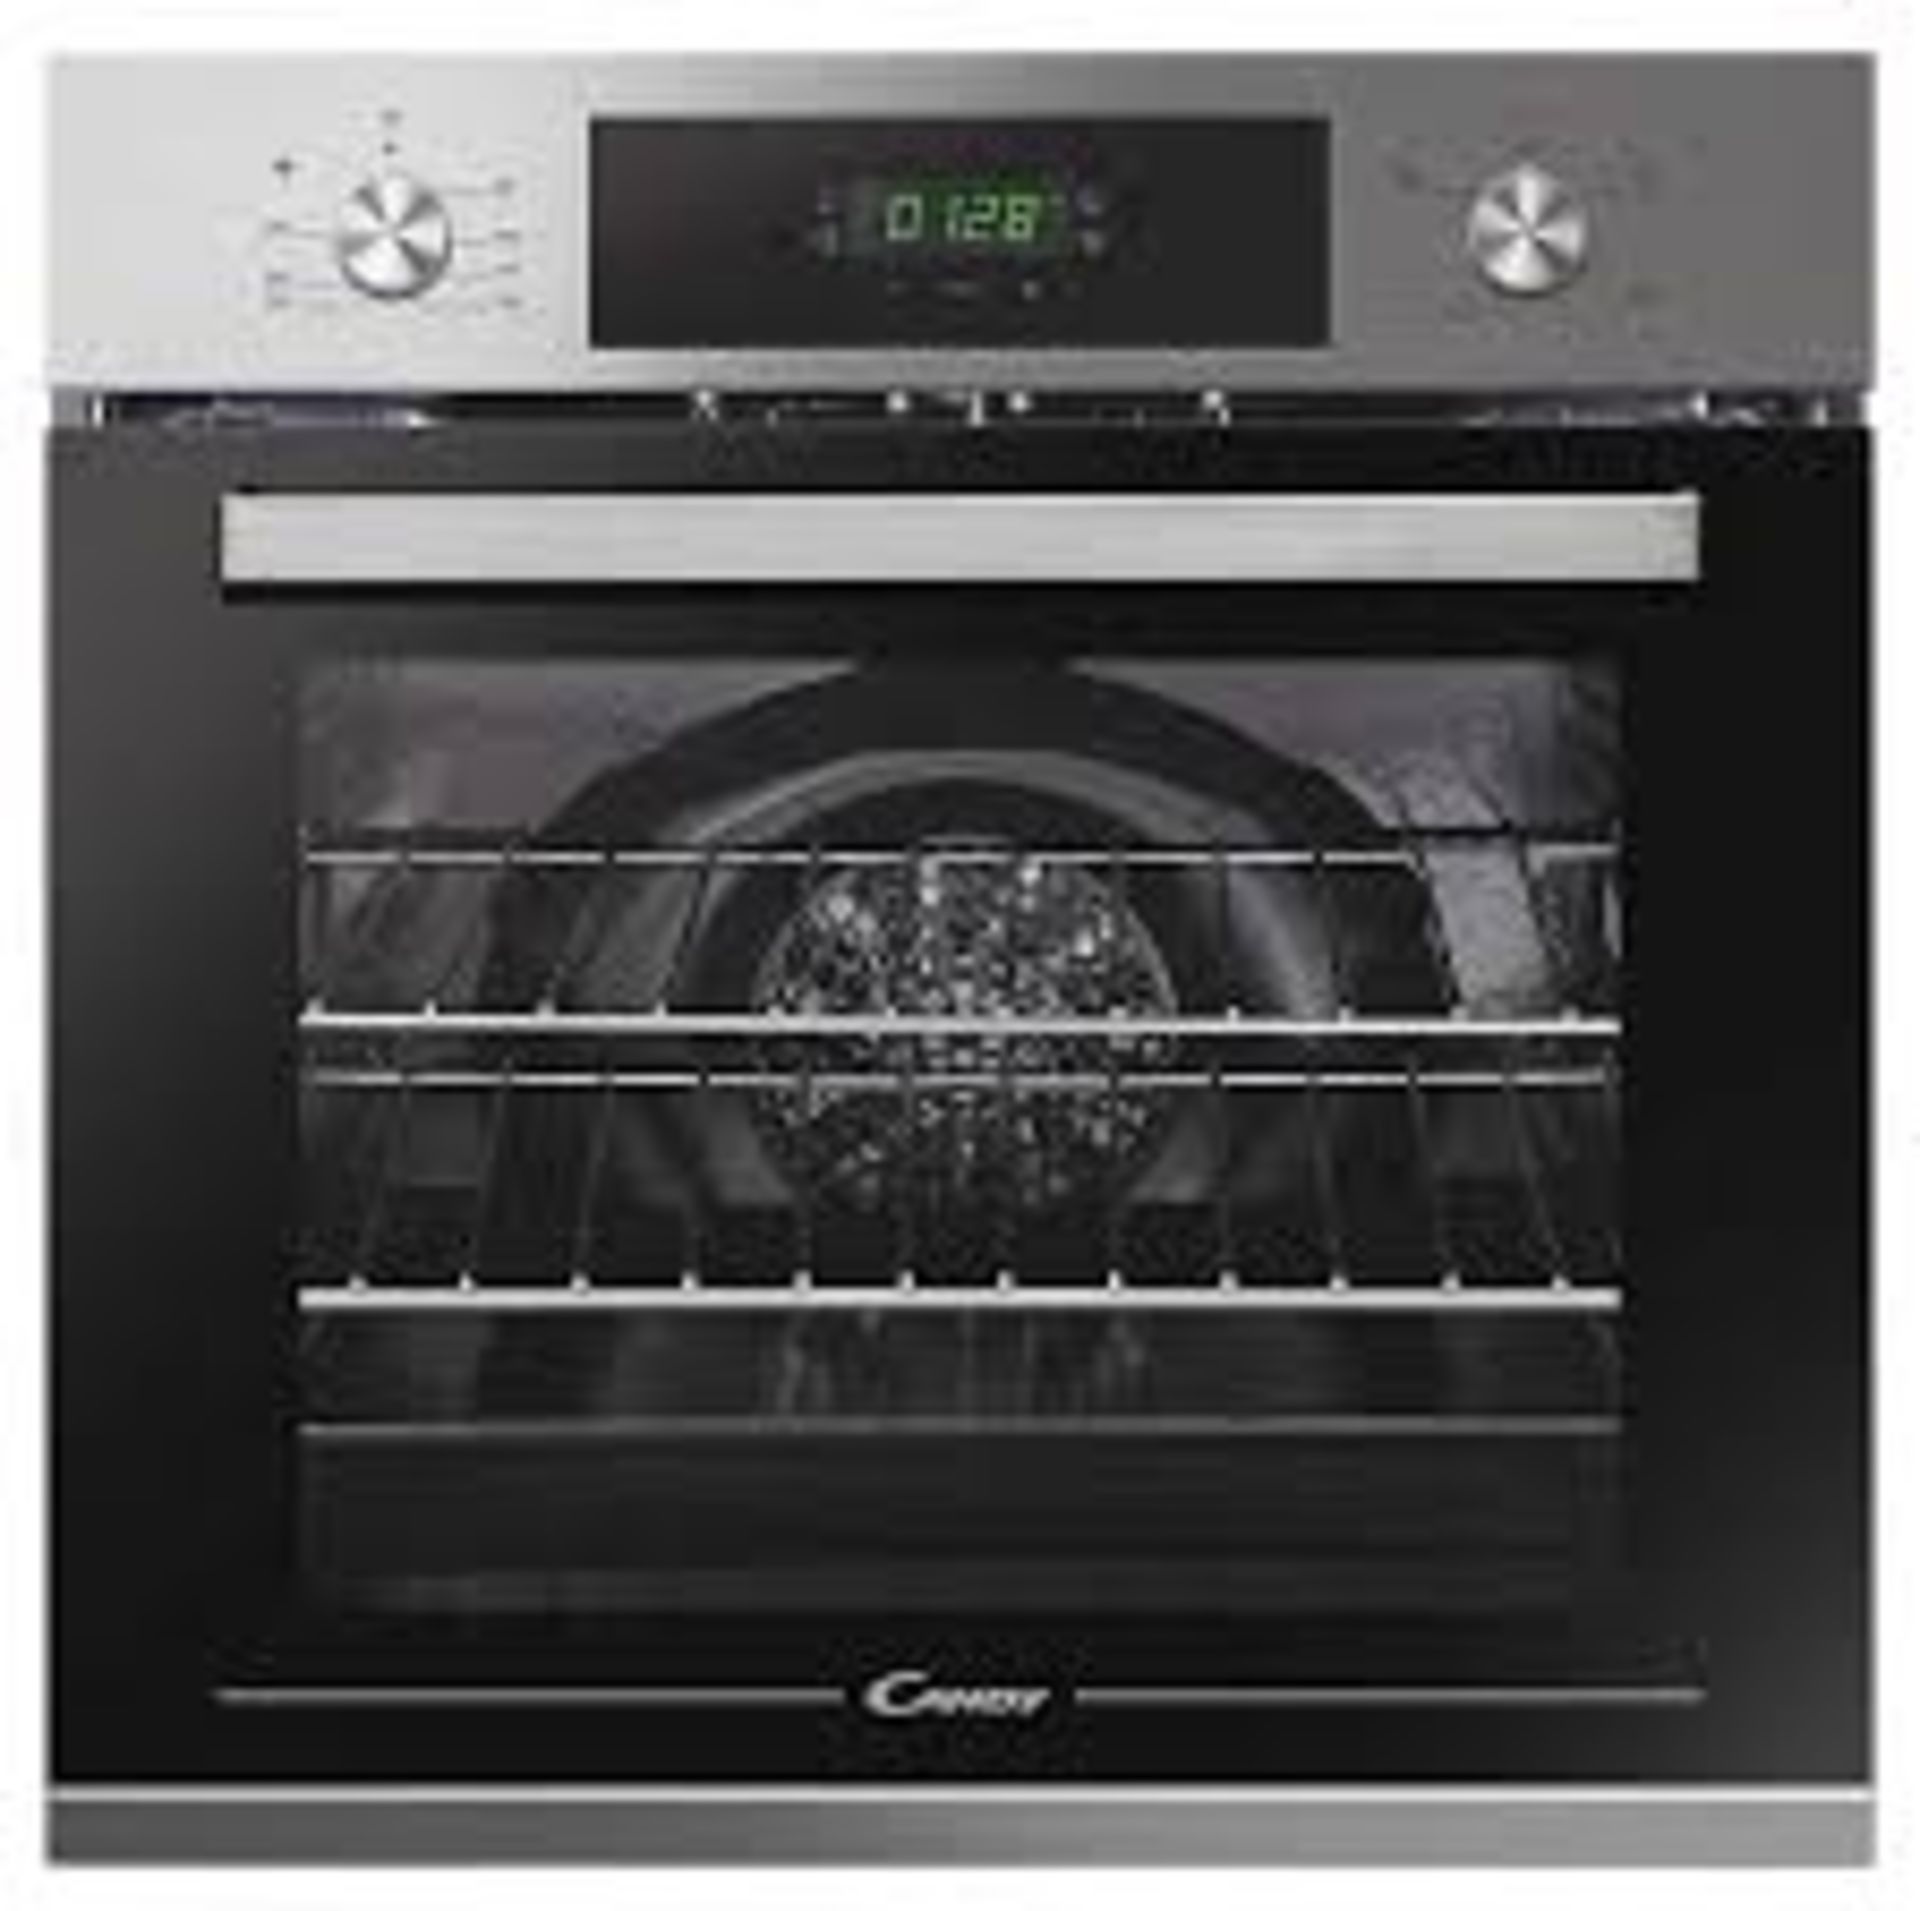 Candy Timeless FCT405X Built-in Single Fan Oven. - R13a.4